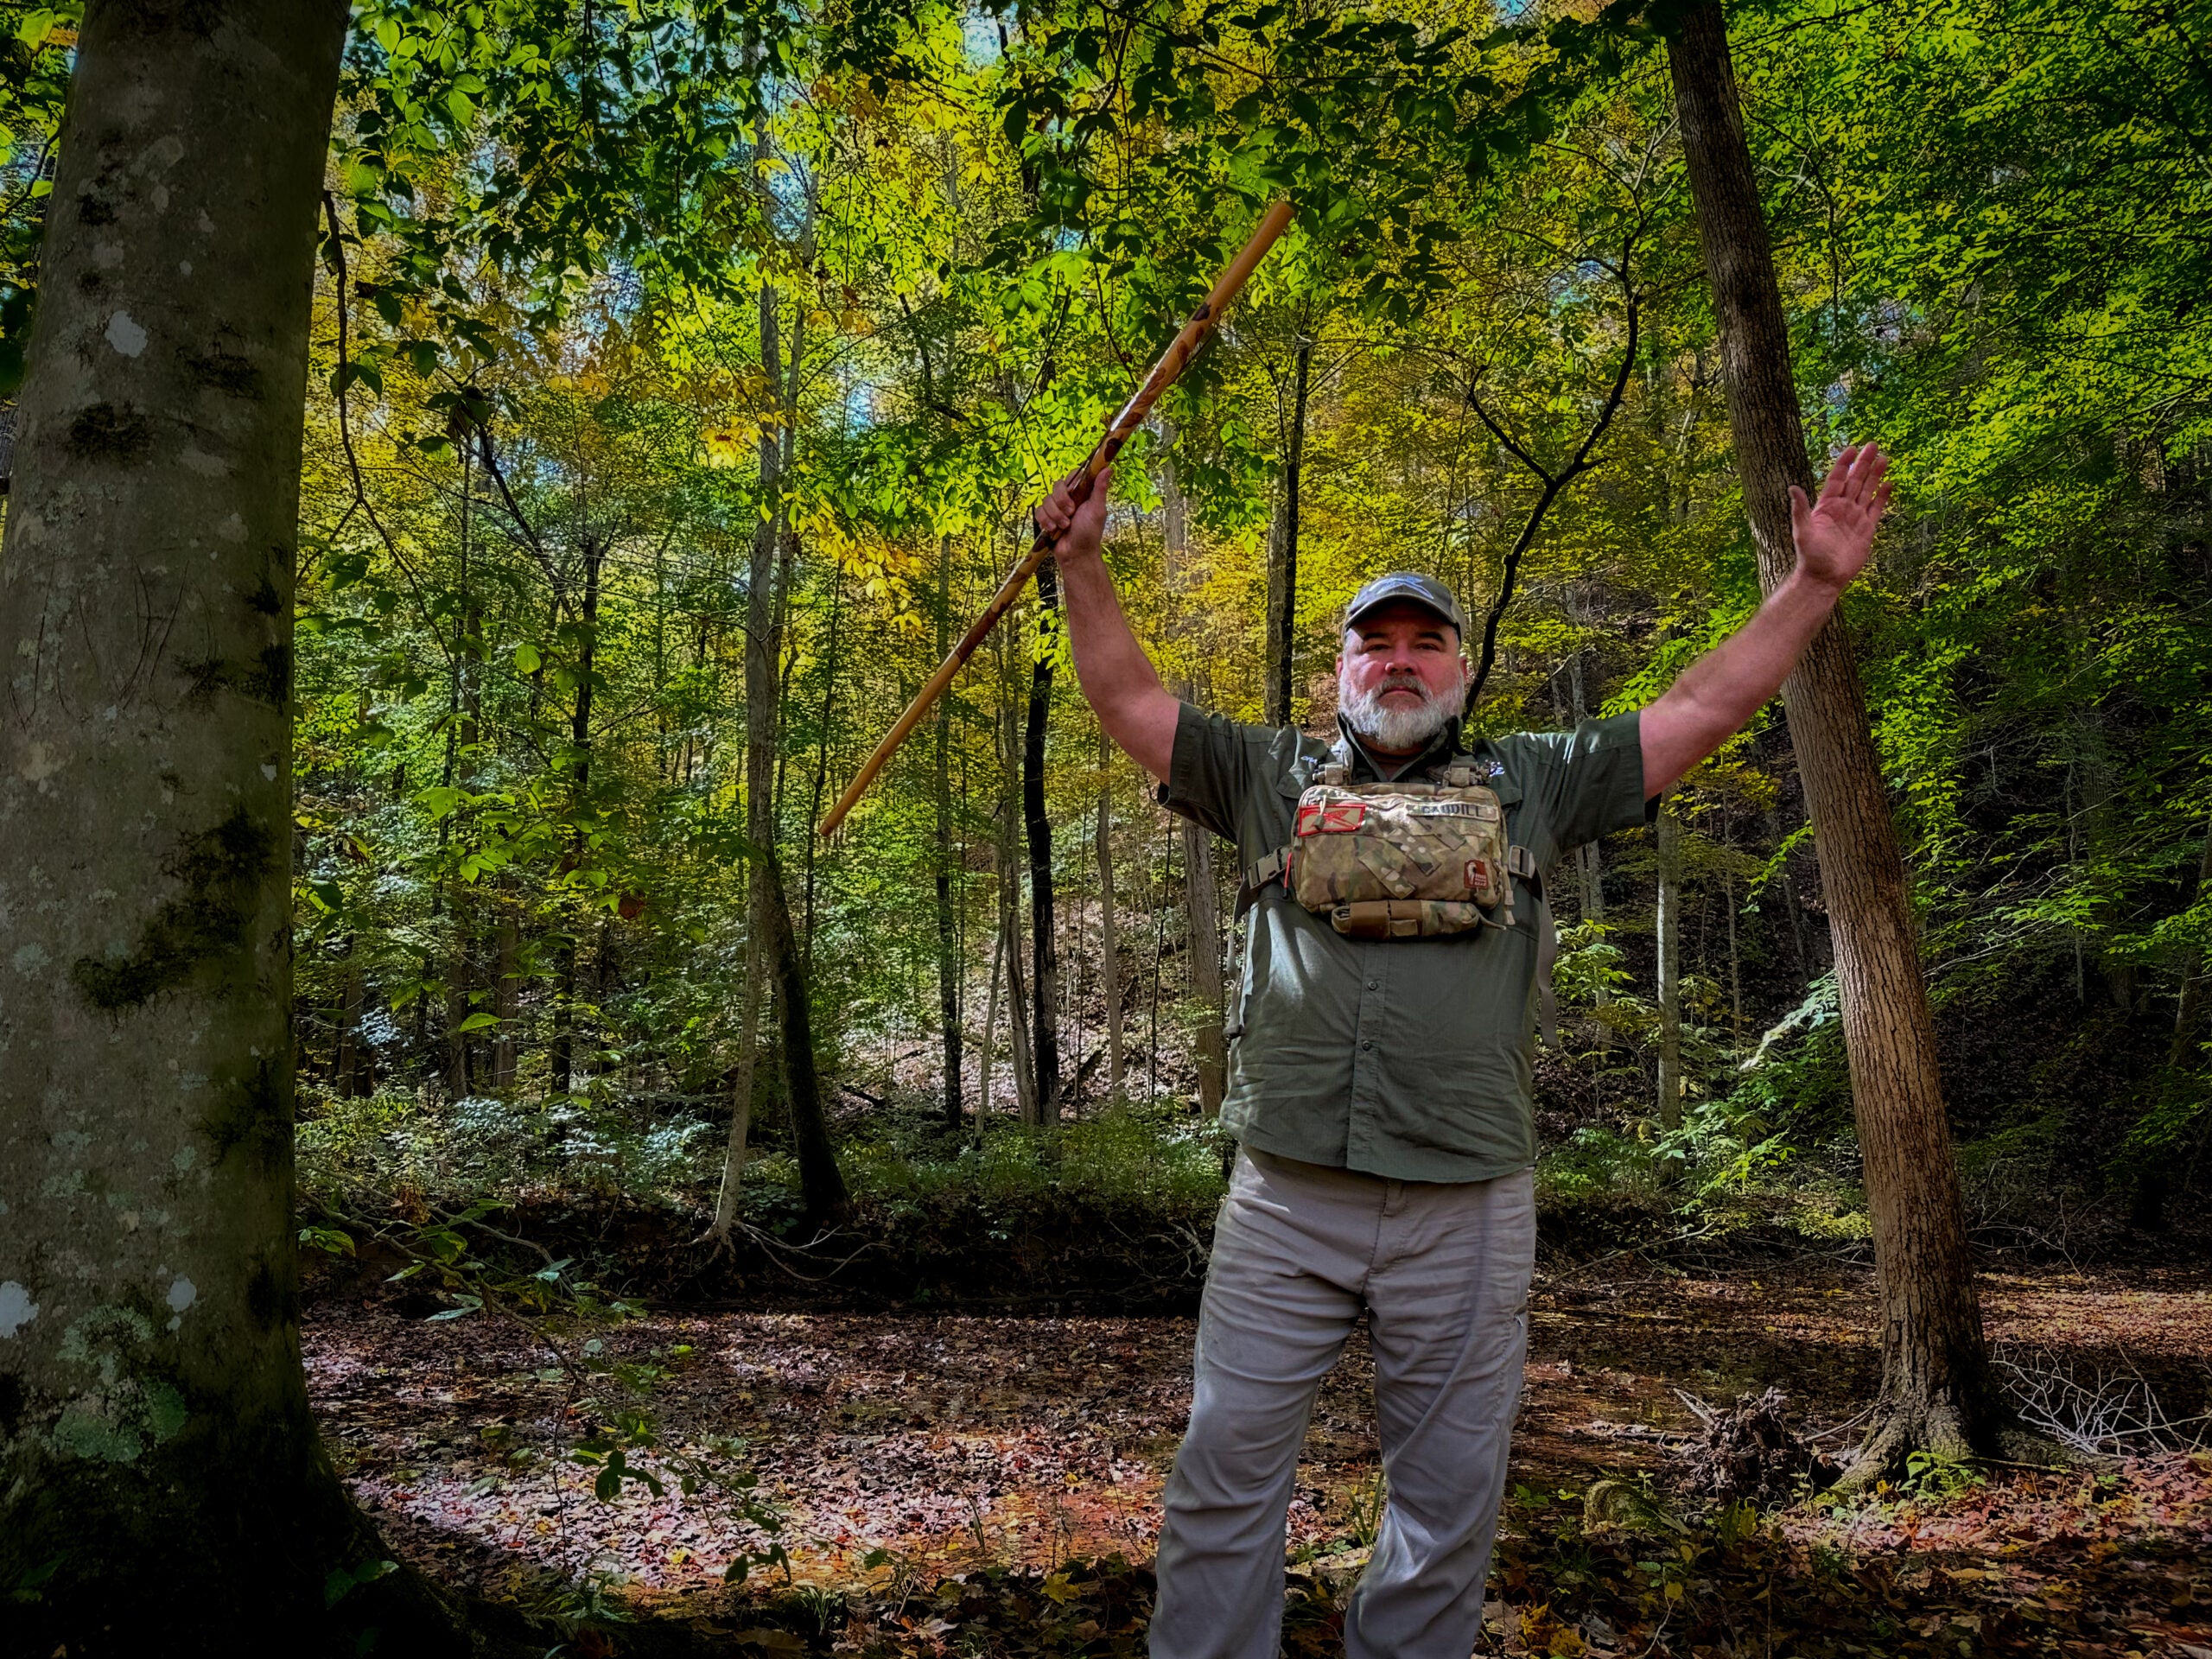 A hiker demonstrates how to wave your arms to prevent a mountain lion attack